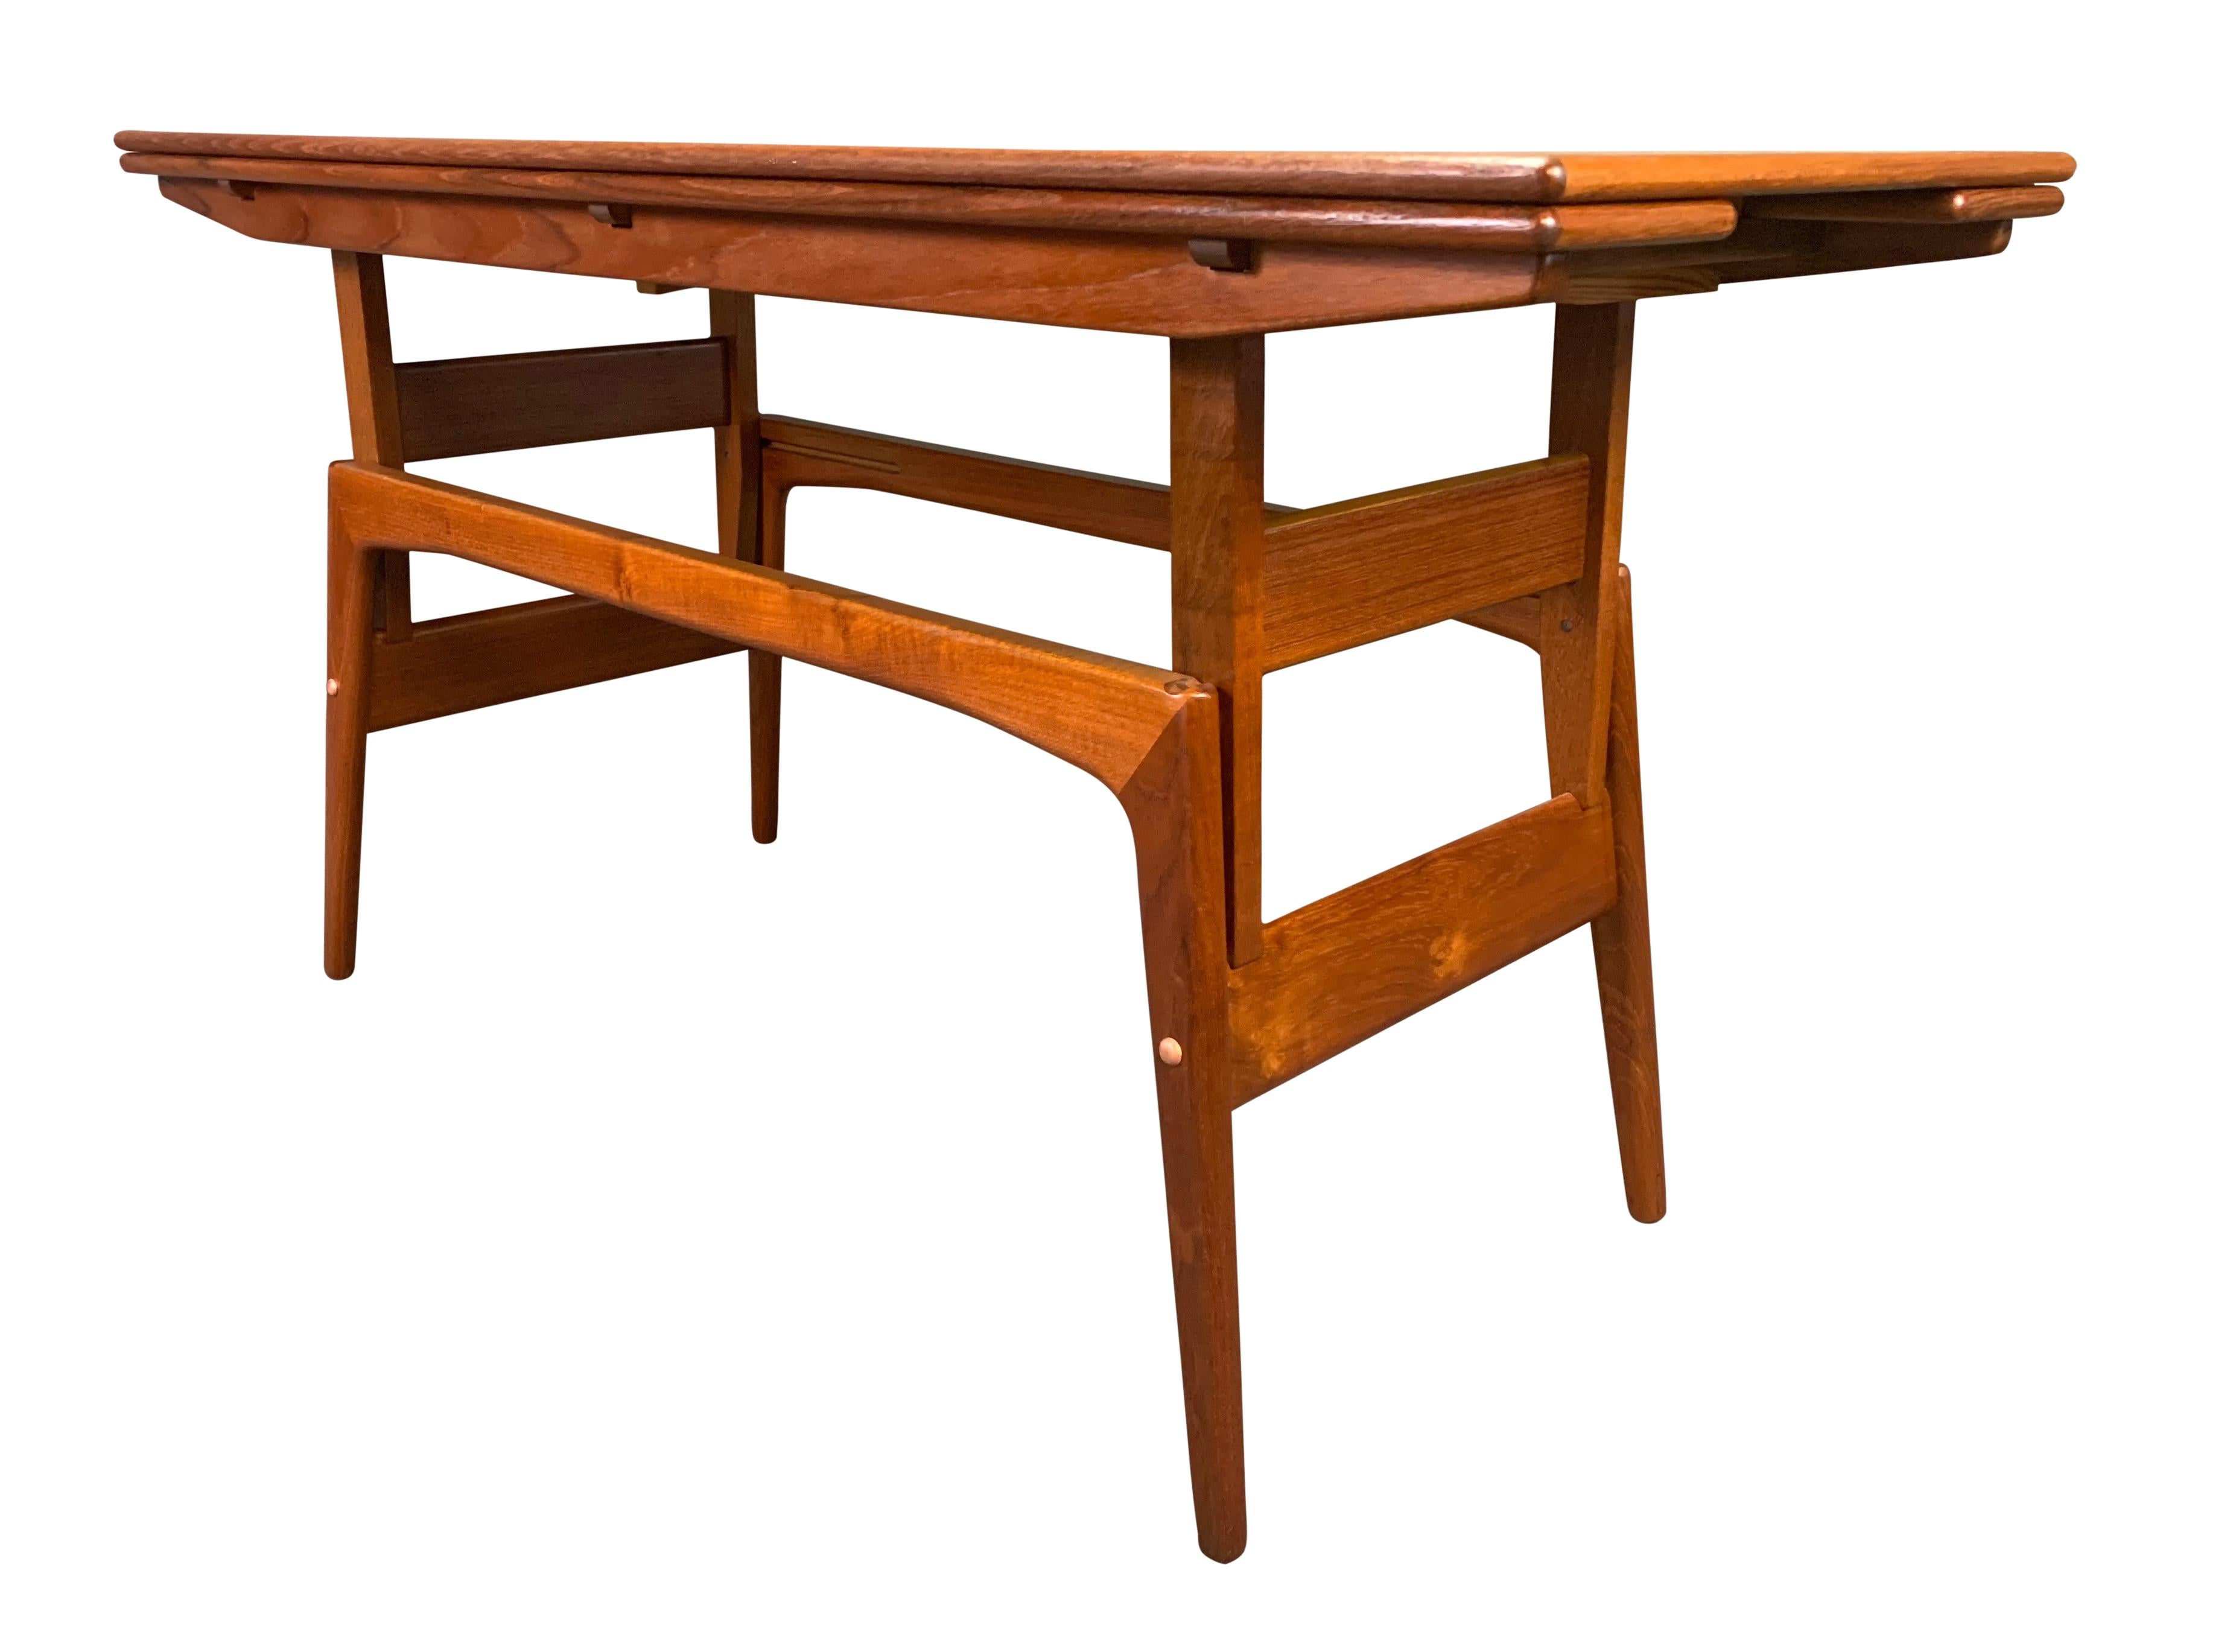 Here is a beautiful and clever 1960s Scandinavian Modern elevator table in teak attributed to designer Kai Kristiansen.
This versatile piece, recently imported from Denmark to California before its restoration, features a vibrant wood grain and